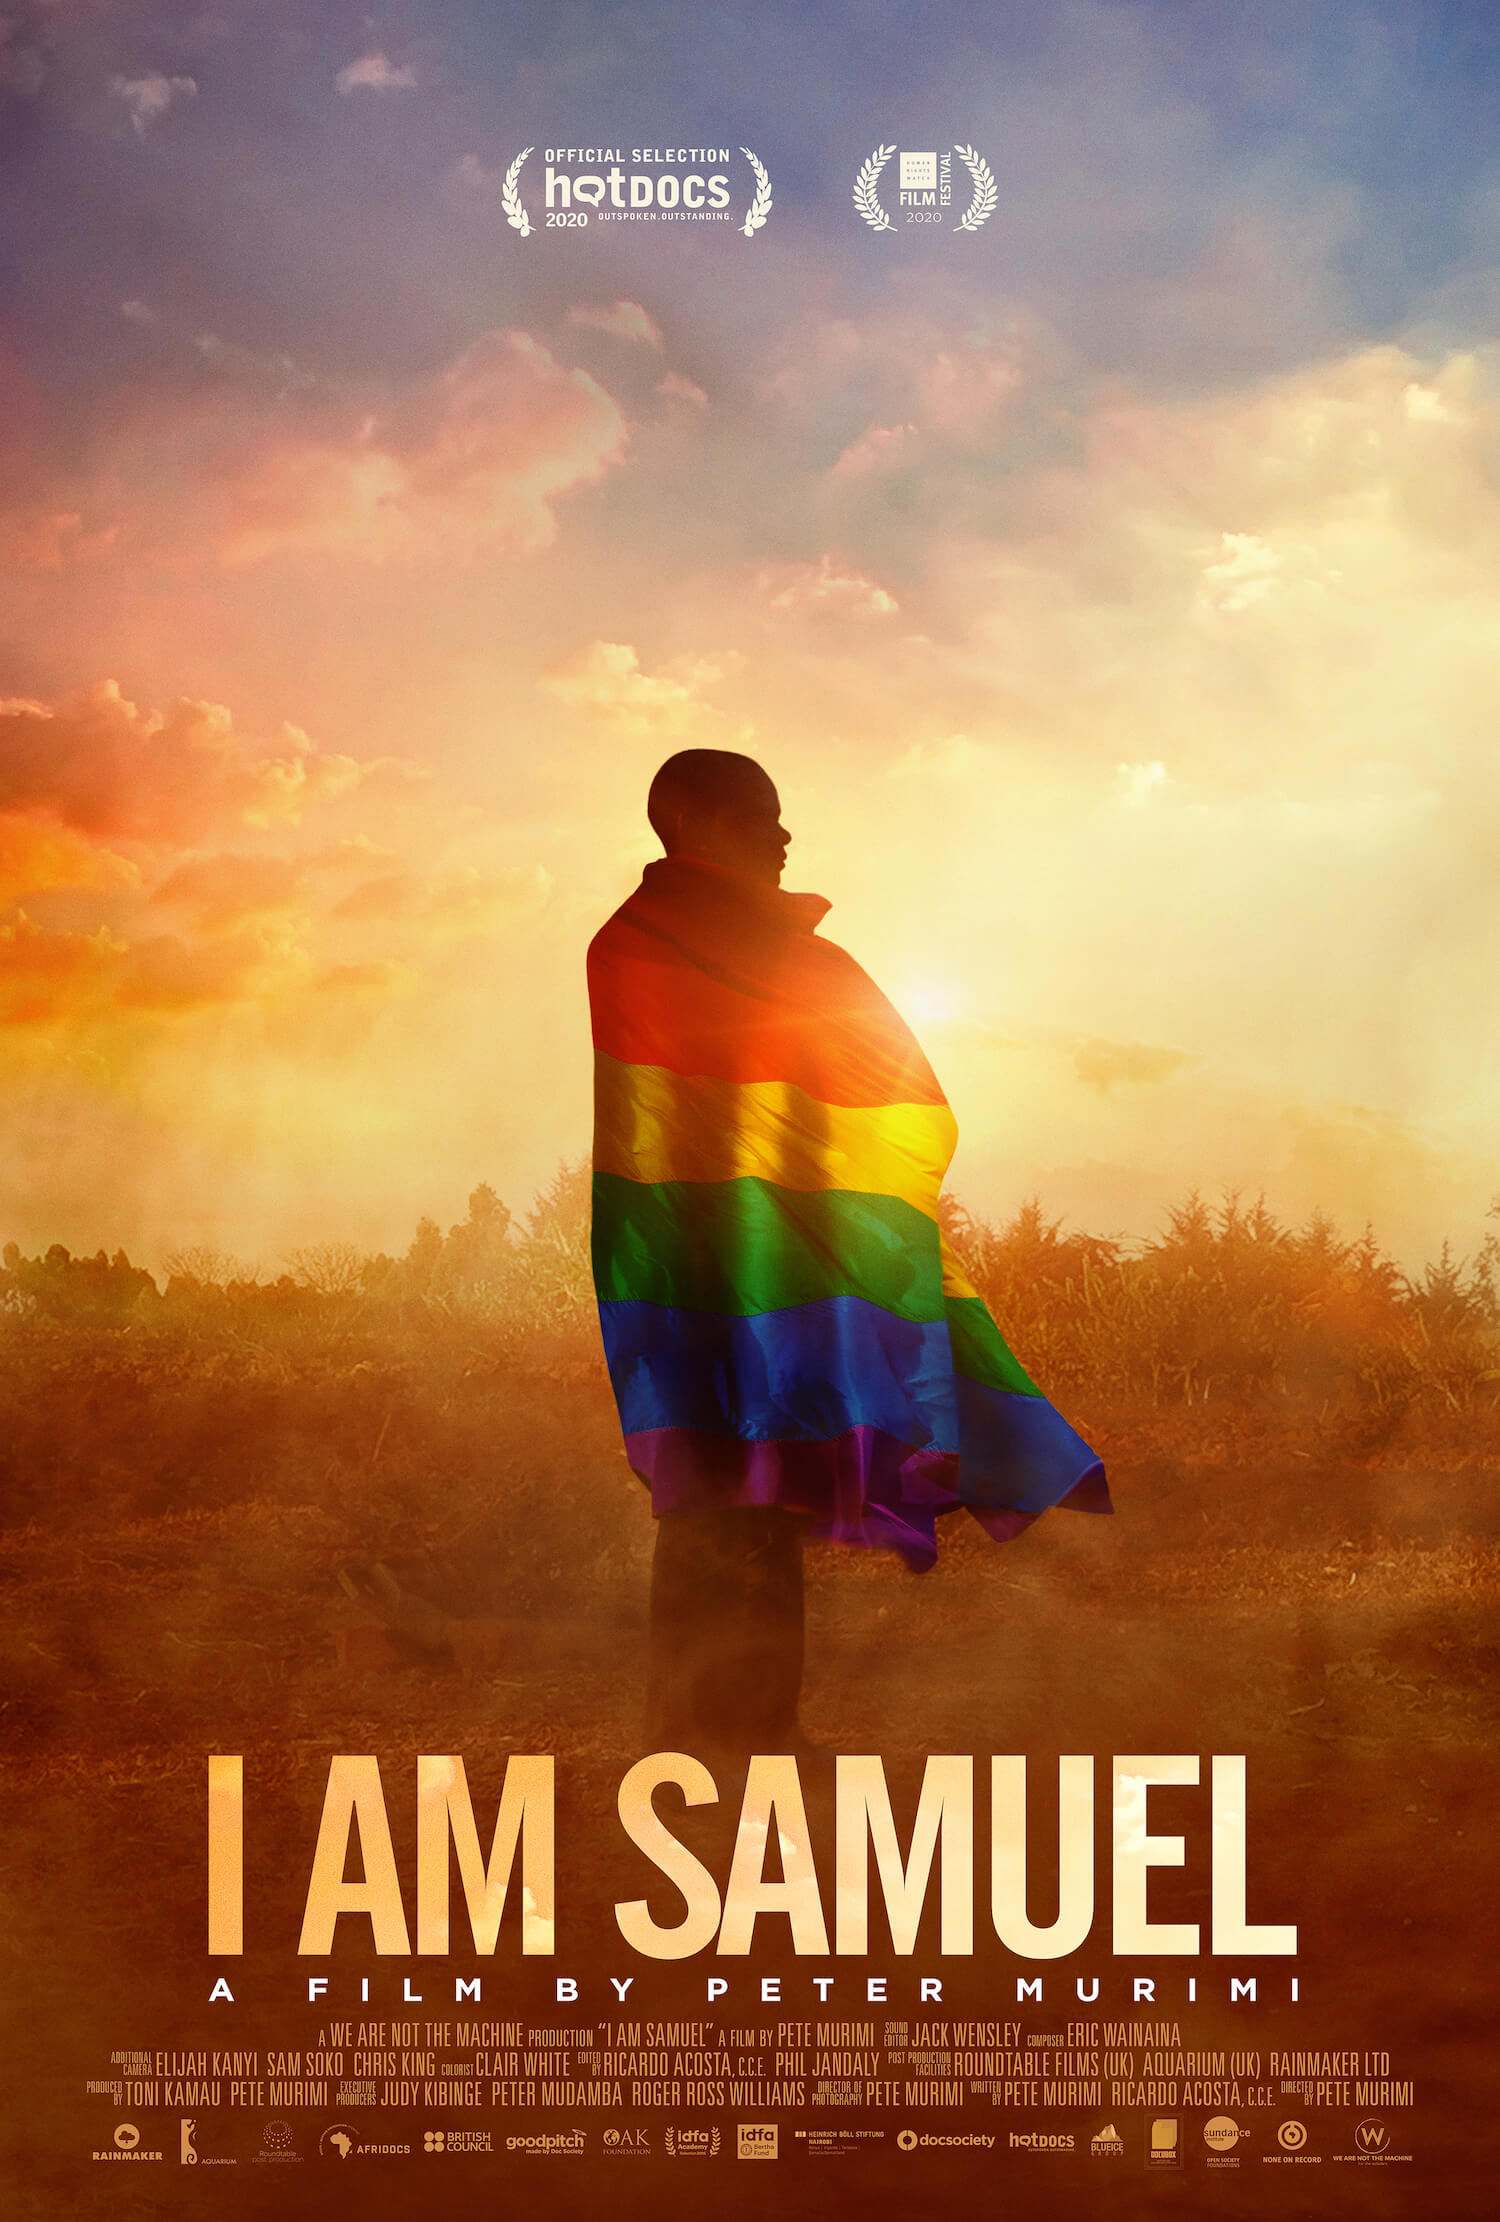 ’I Am Samuel’ film poster, featuring a young man in a field with a rainbow flag draped over him